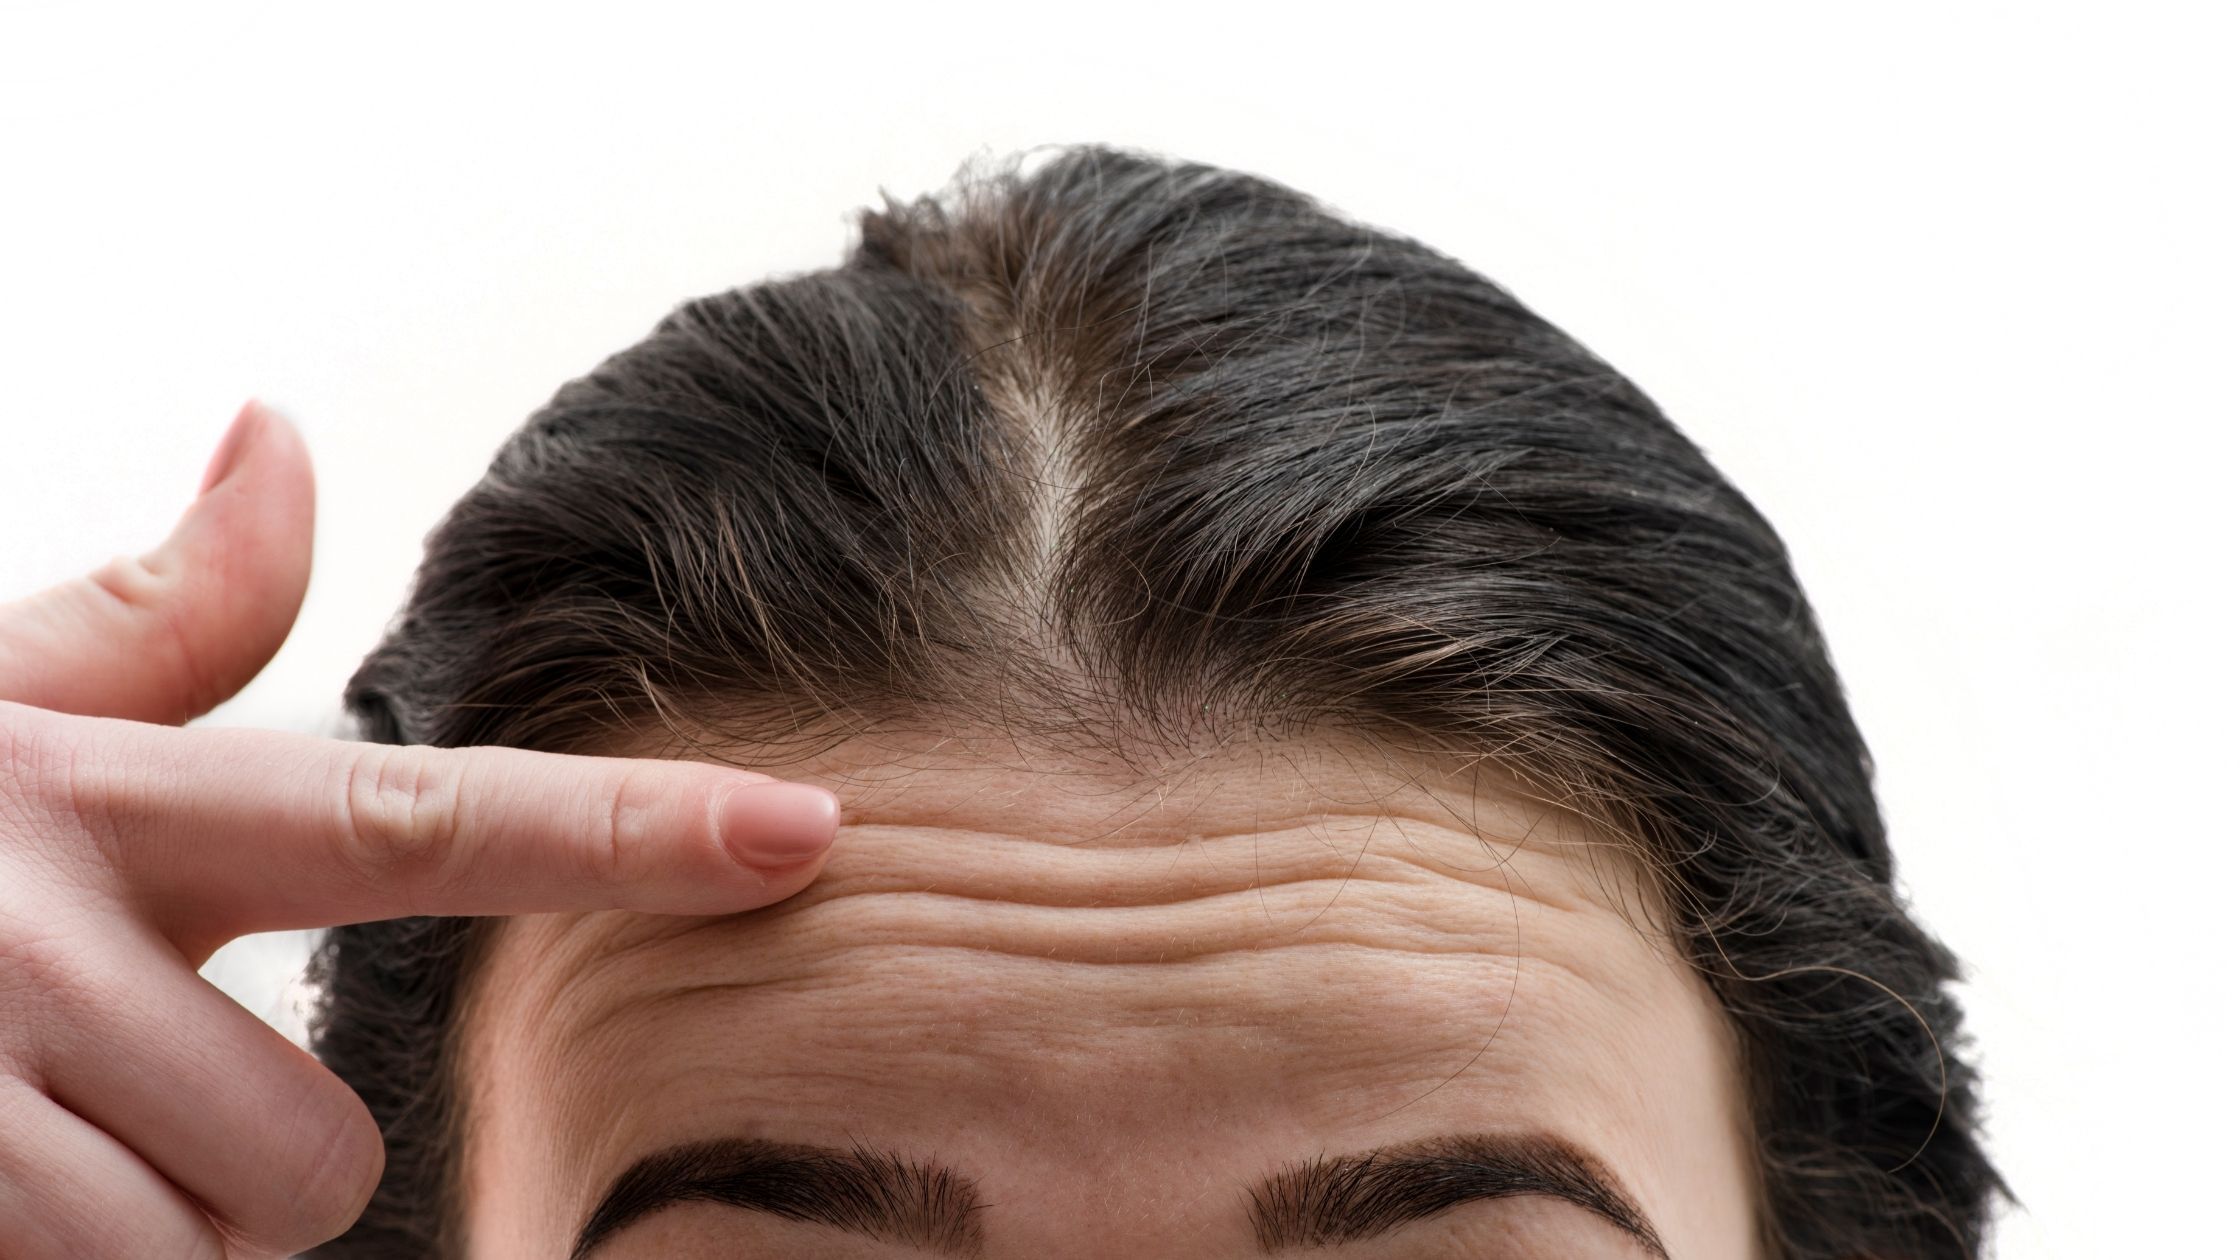 Saggy Eyelid Skin Can Cause Forehead Wrinkles at an Early Age